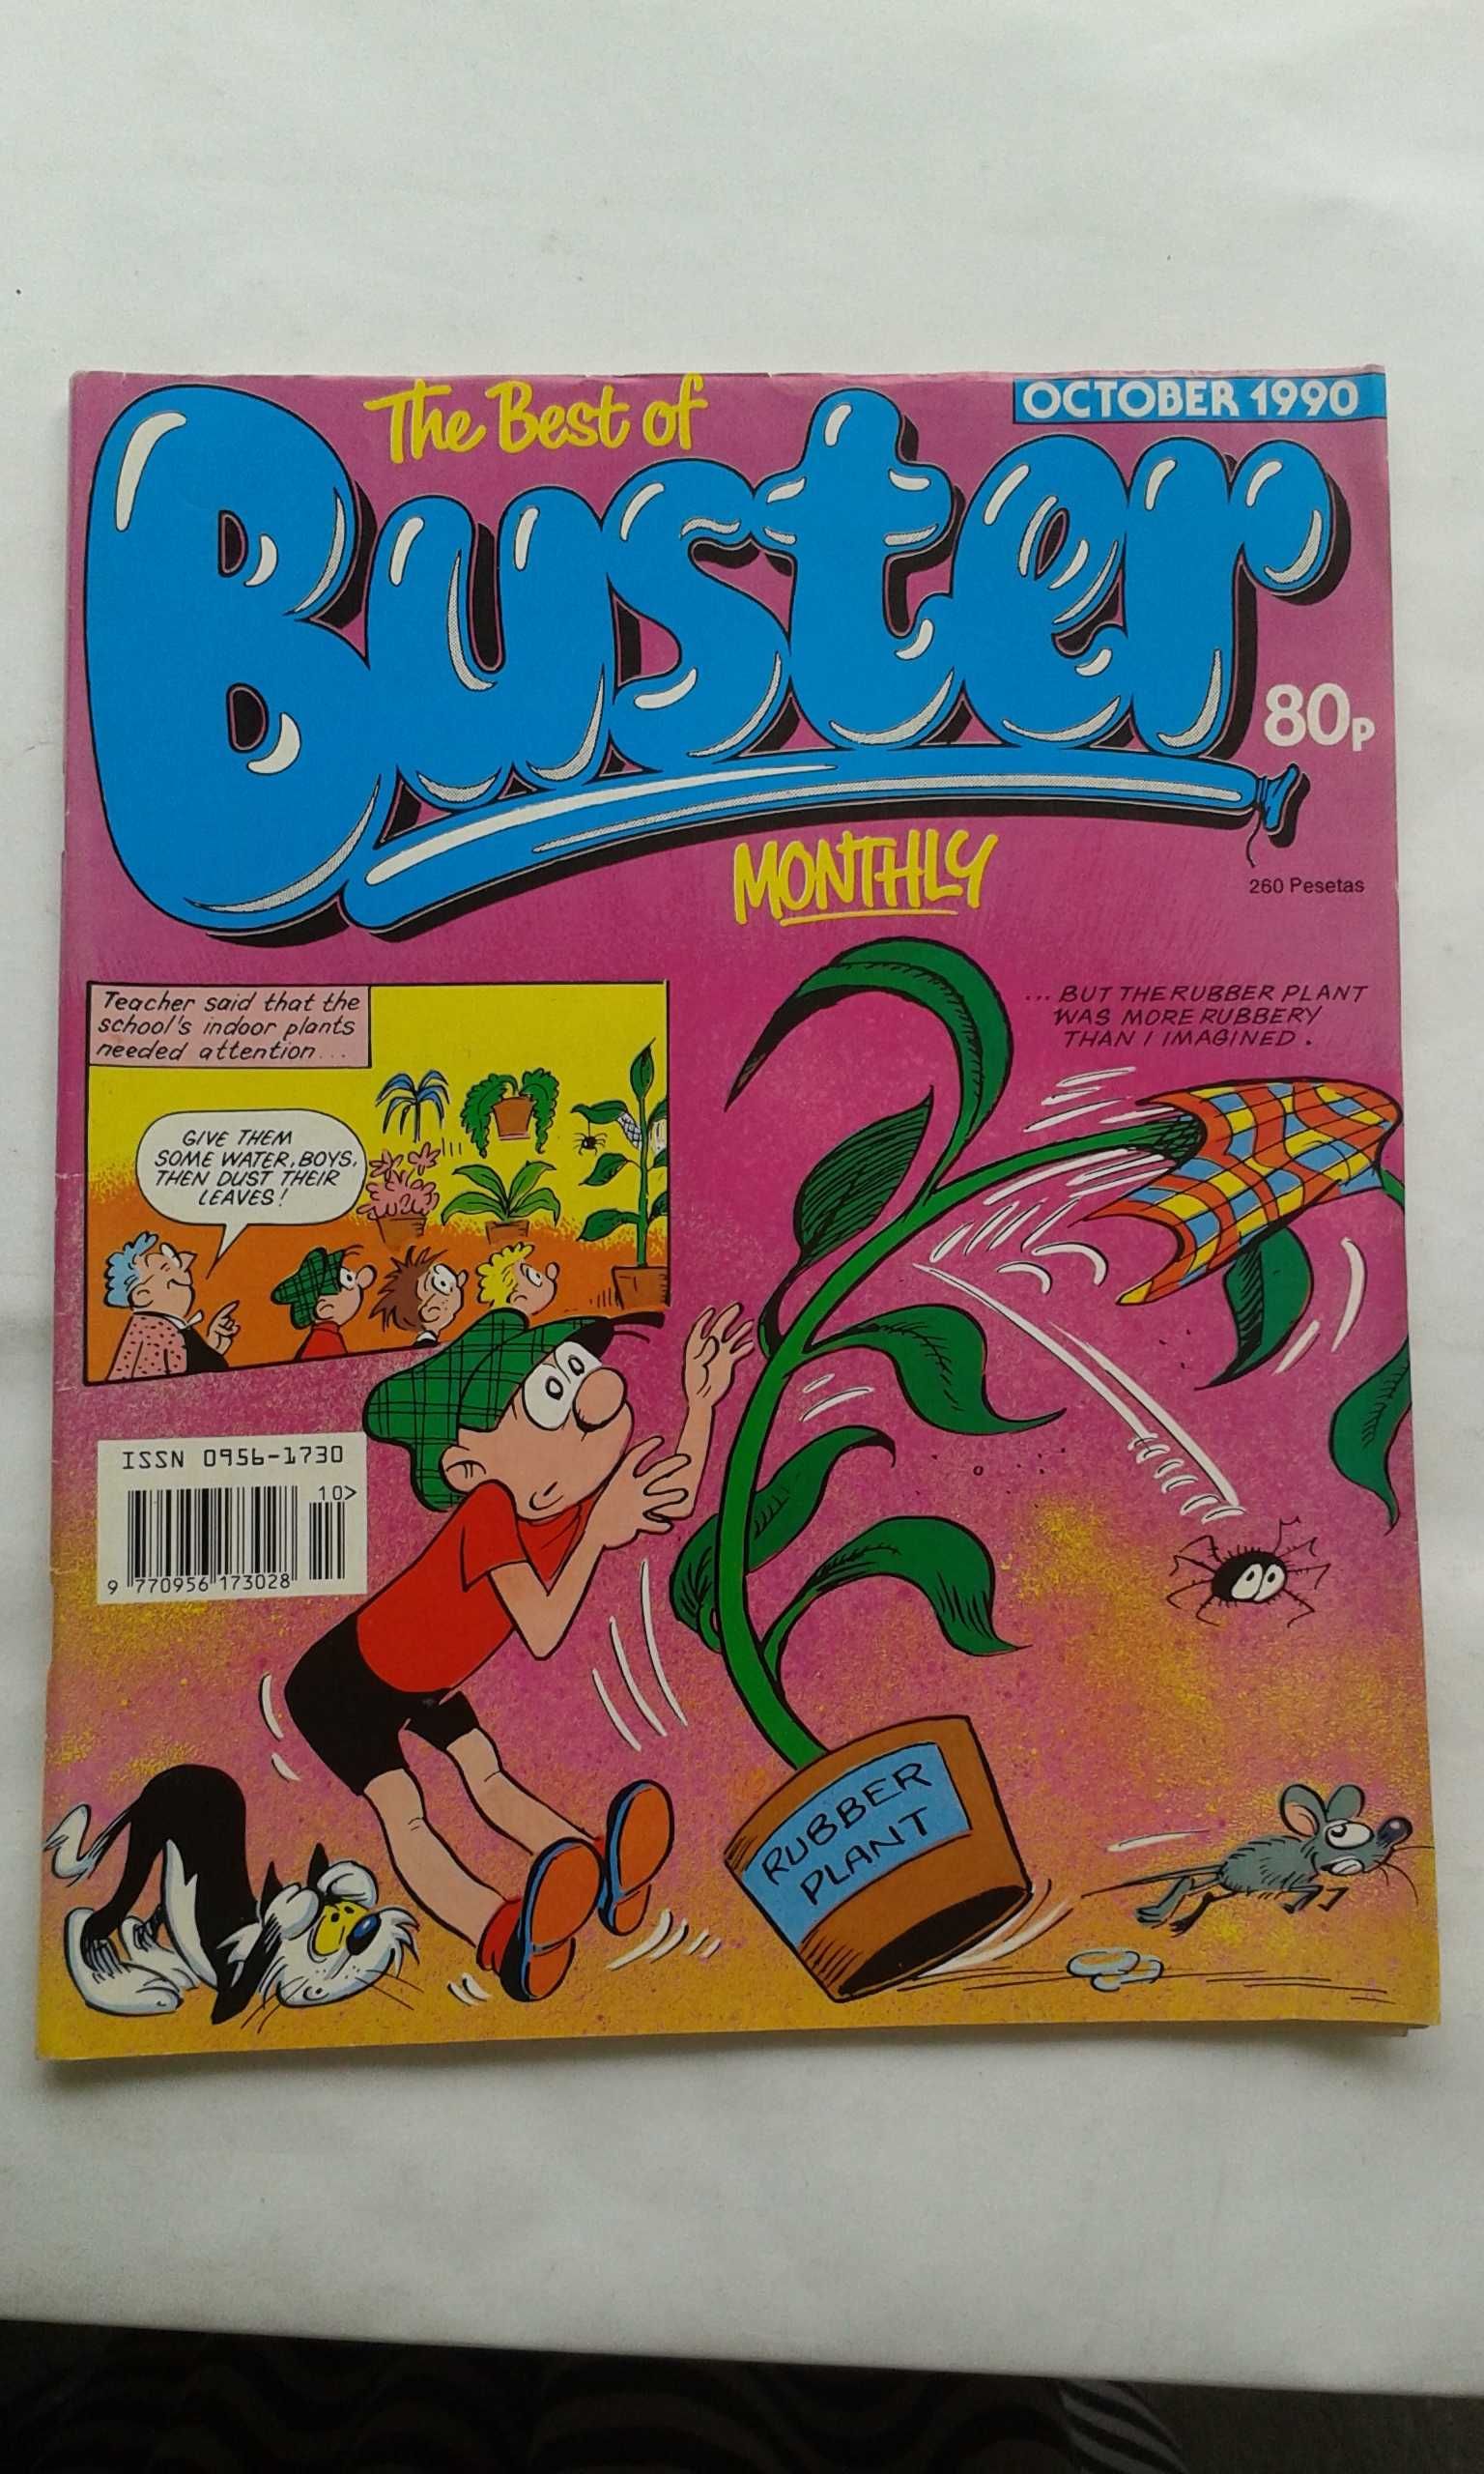 komiks -The best of Buster